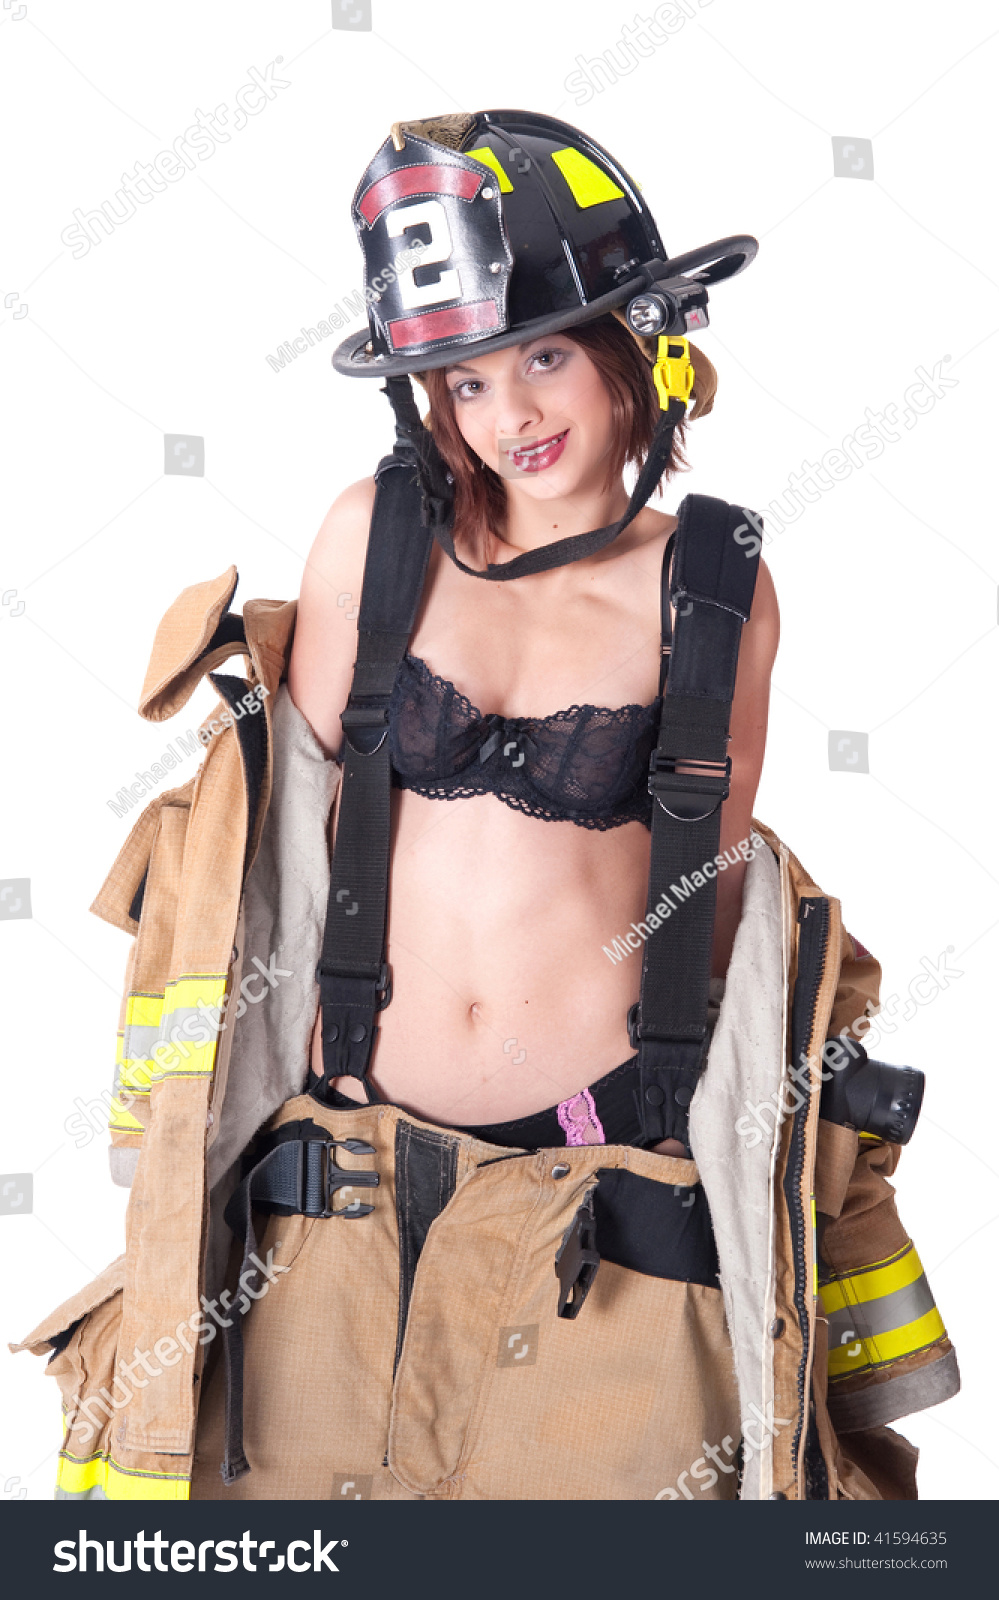 Naked Girl Dressed Up As Firefighter